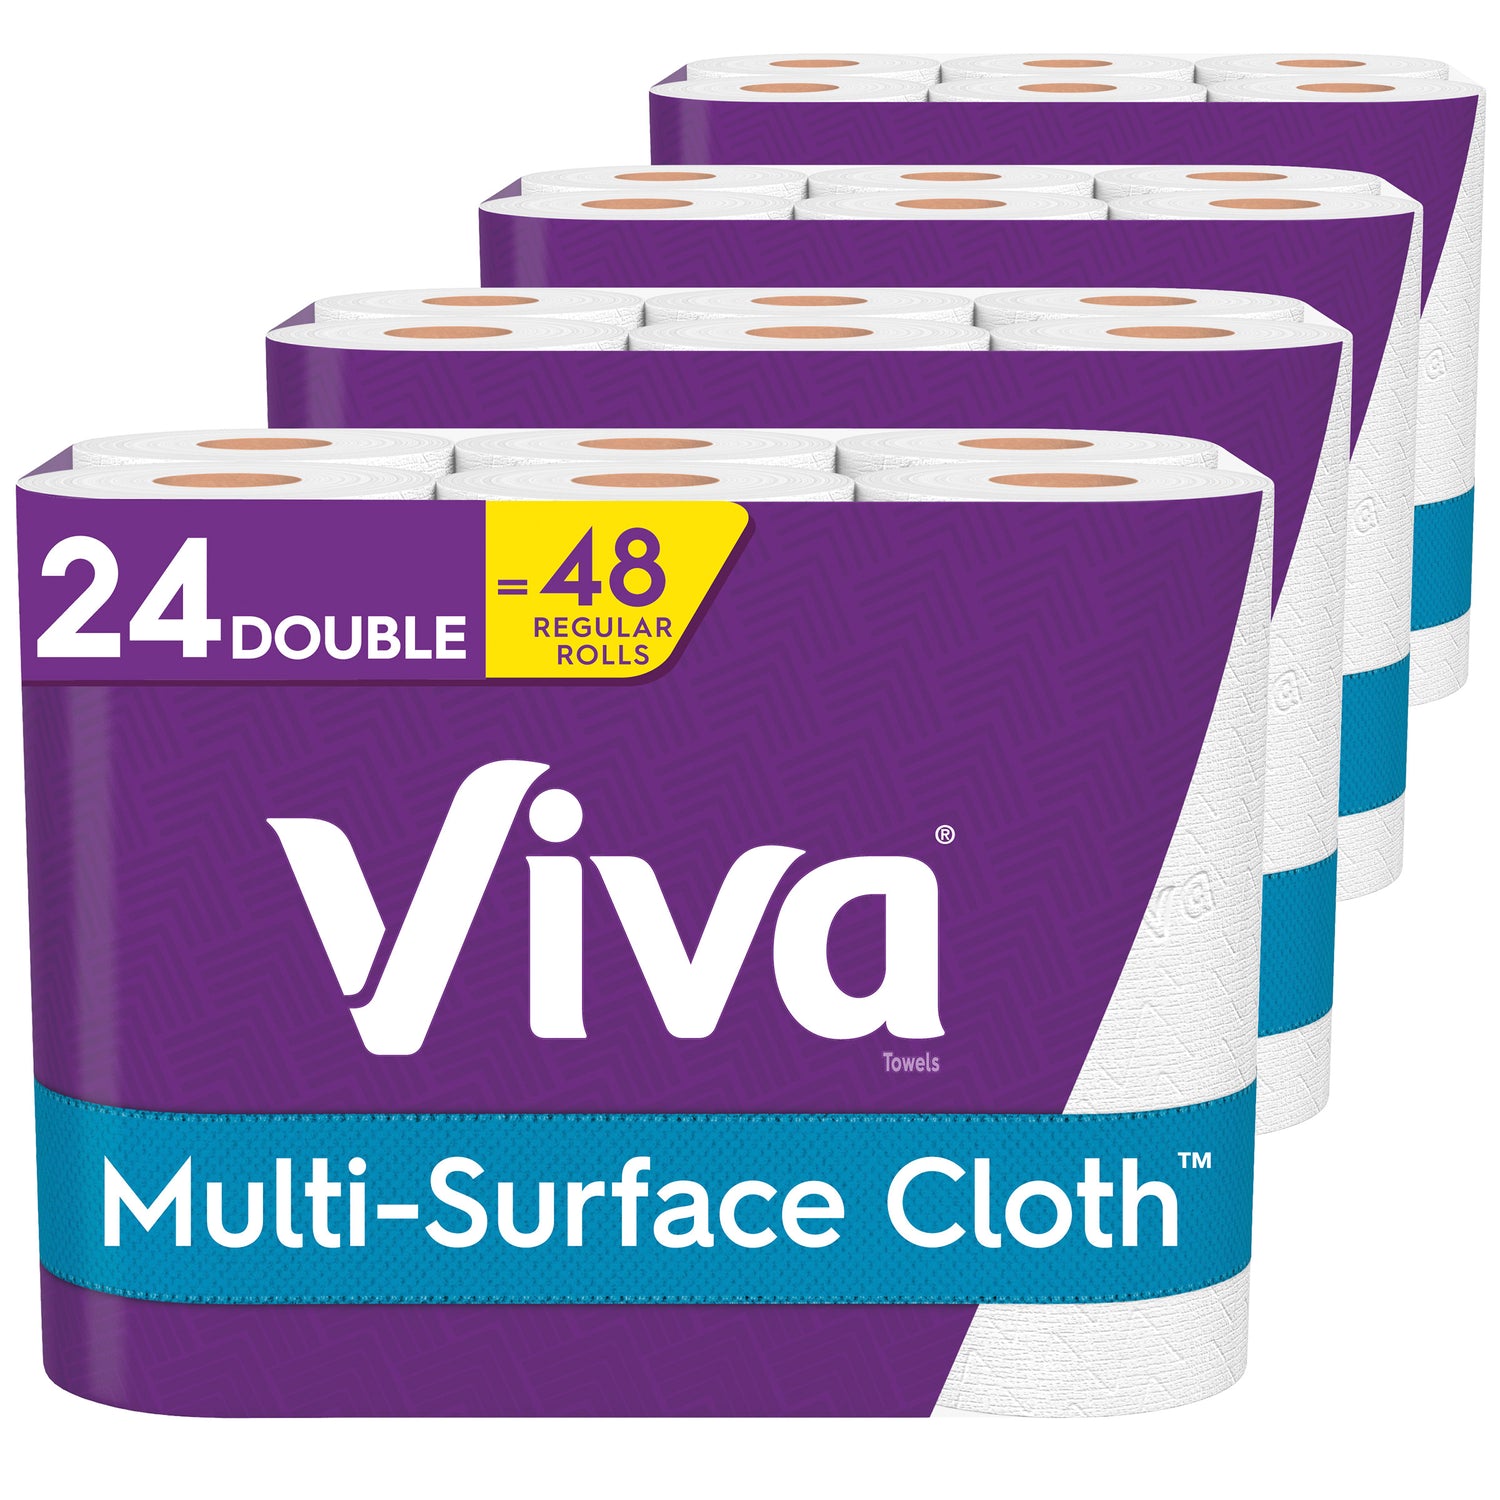 Viva Multi-Surface Cloth Paper Towels, 2-Ply, 110 Sheets, 24-Count